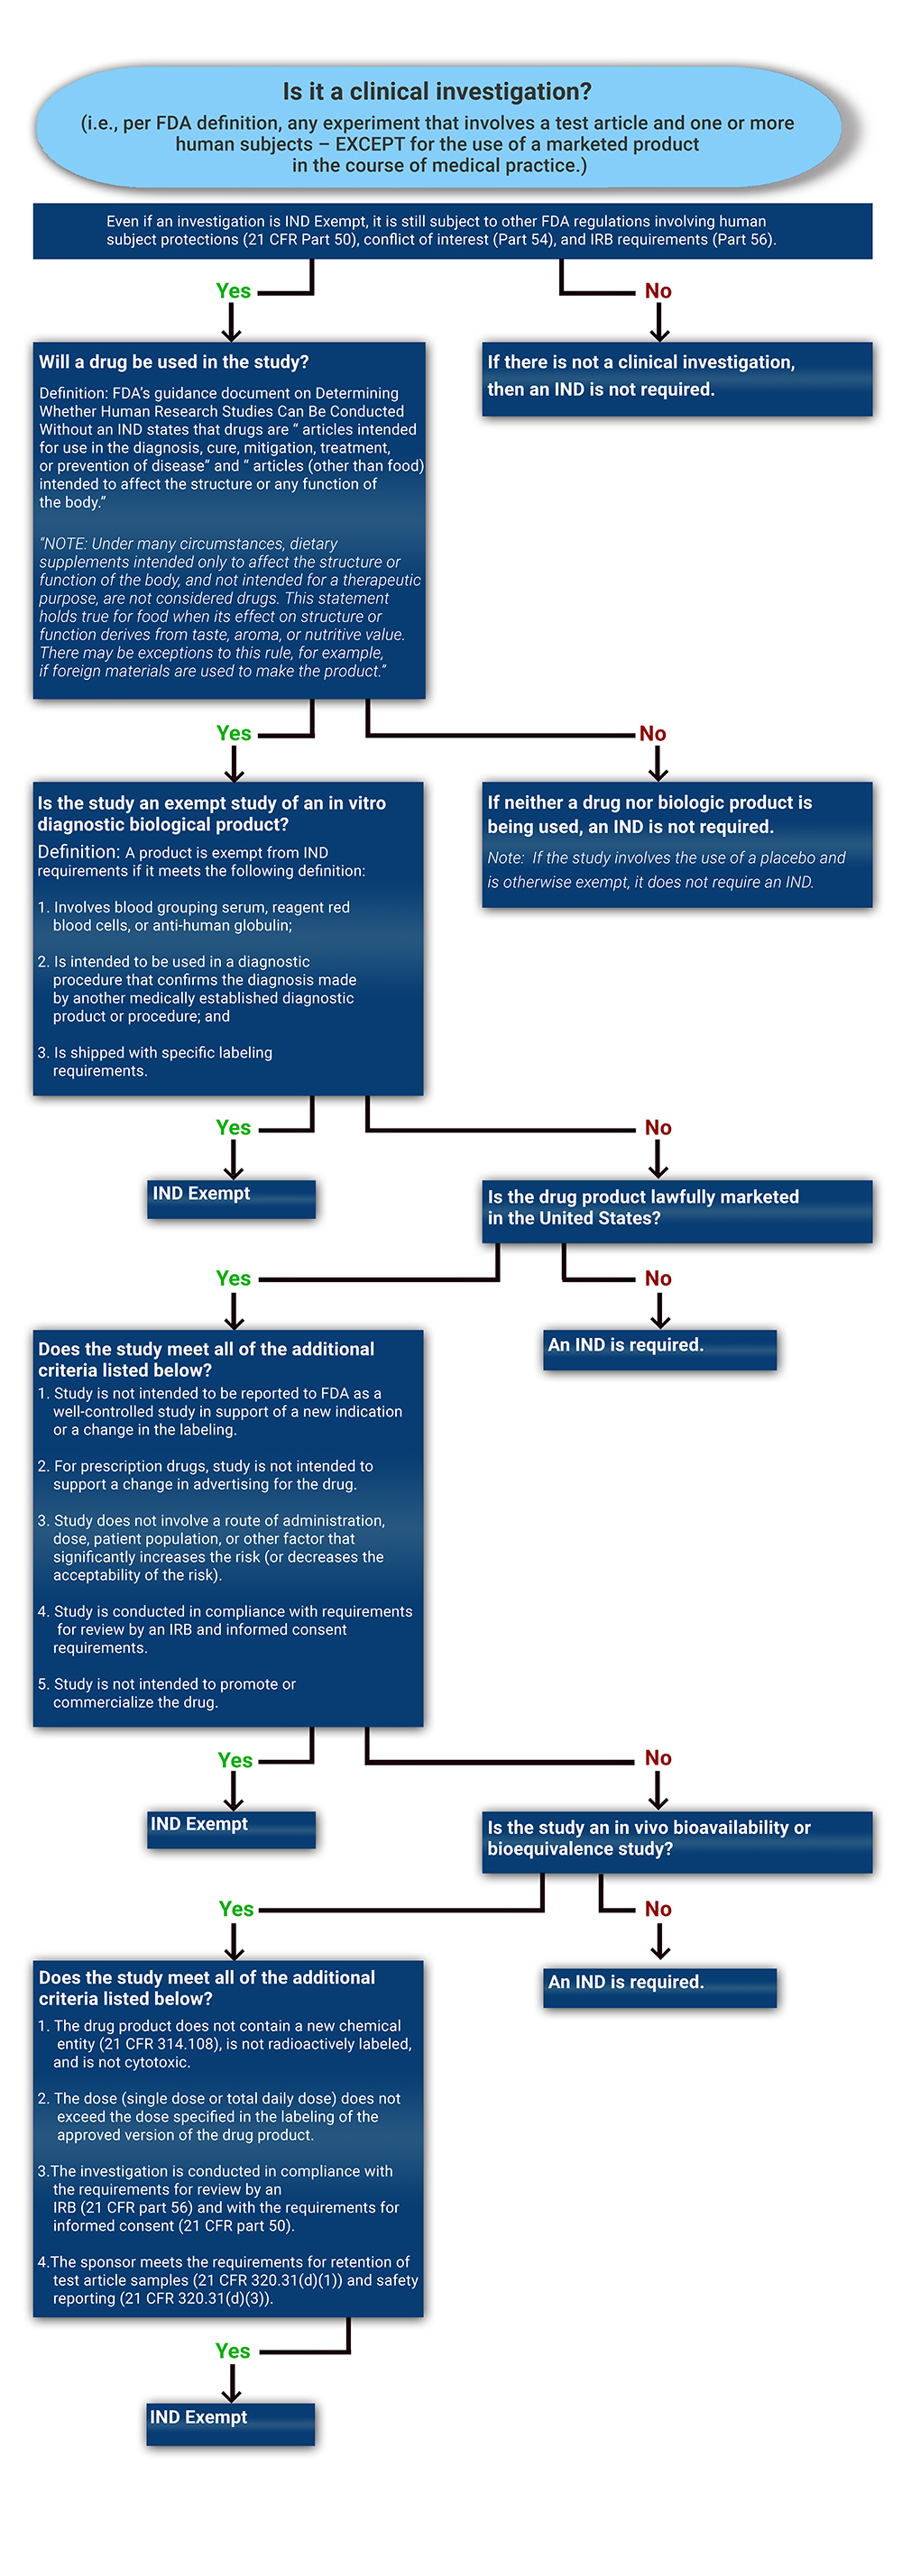 Decision Tree Flowchart - Is it a clinical investigation? (i.e., per FDA definition, any experiment that involves a test article and one or more human subjects - EXCEPT for the use of a marketed products in the course of medical practice.). Even if an investigation is IND Exempt, it is still subject to other FDA regulations involving human subject protections (21 CFR Part 50), conflict of interest (Part 54), and IRB requirements (Part 56)